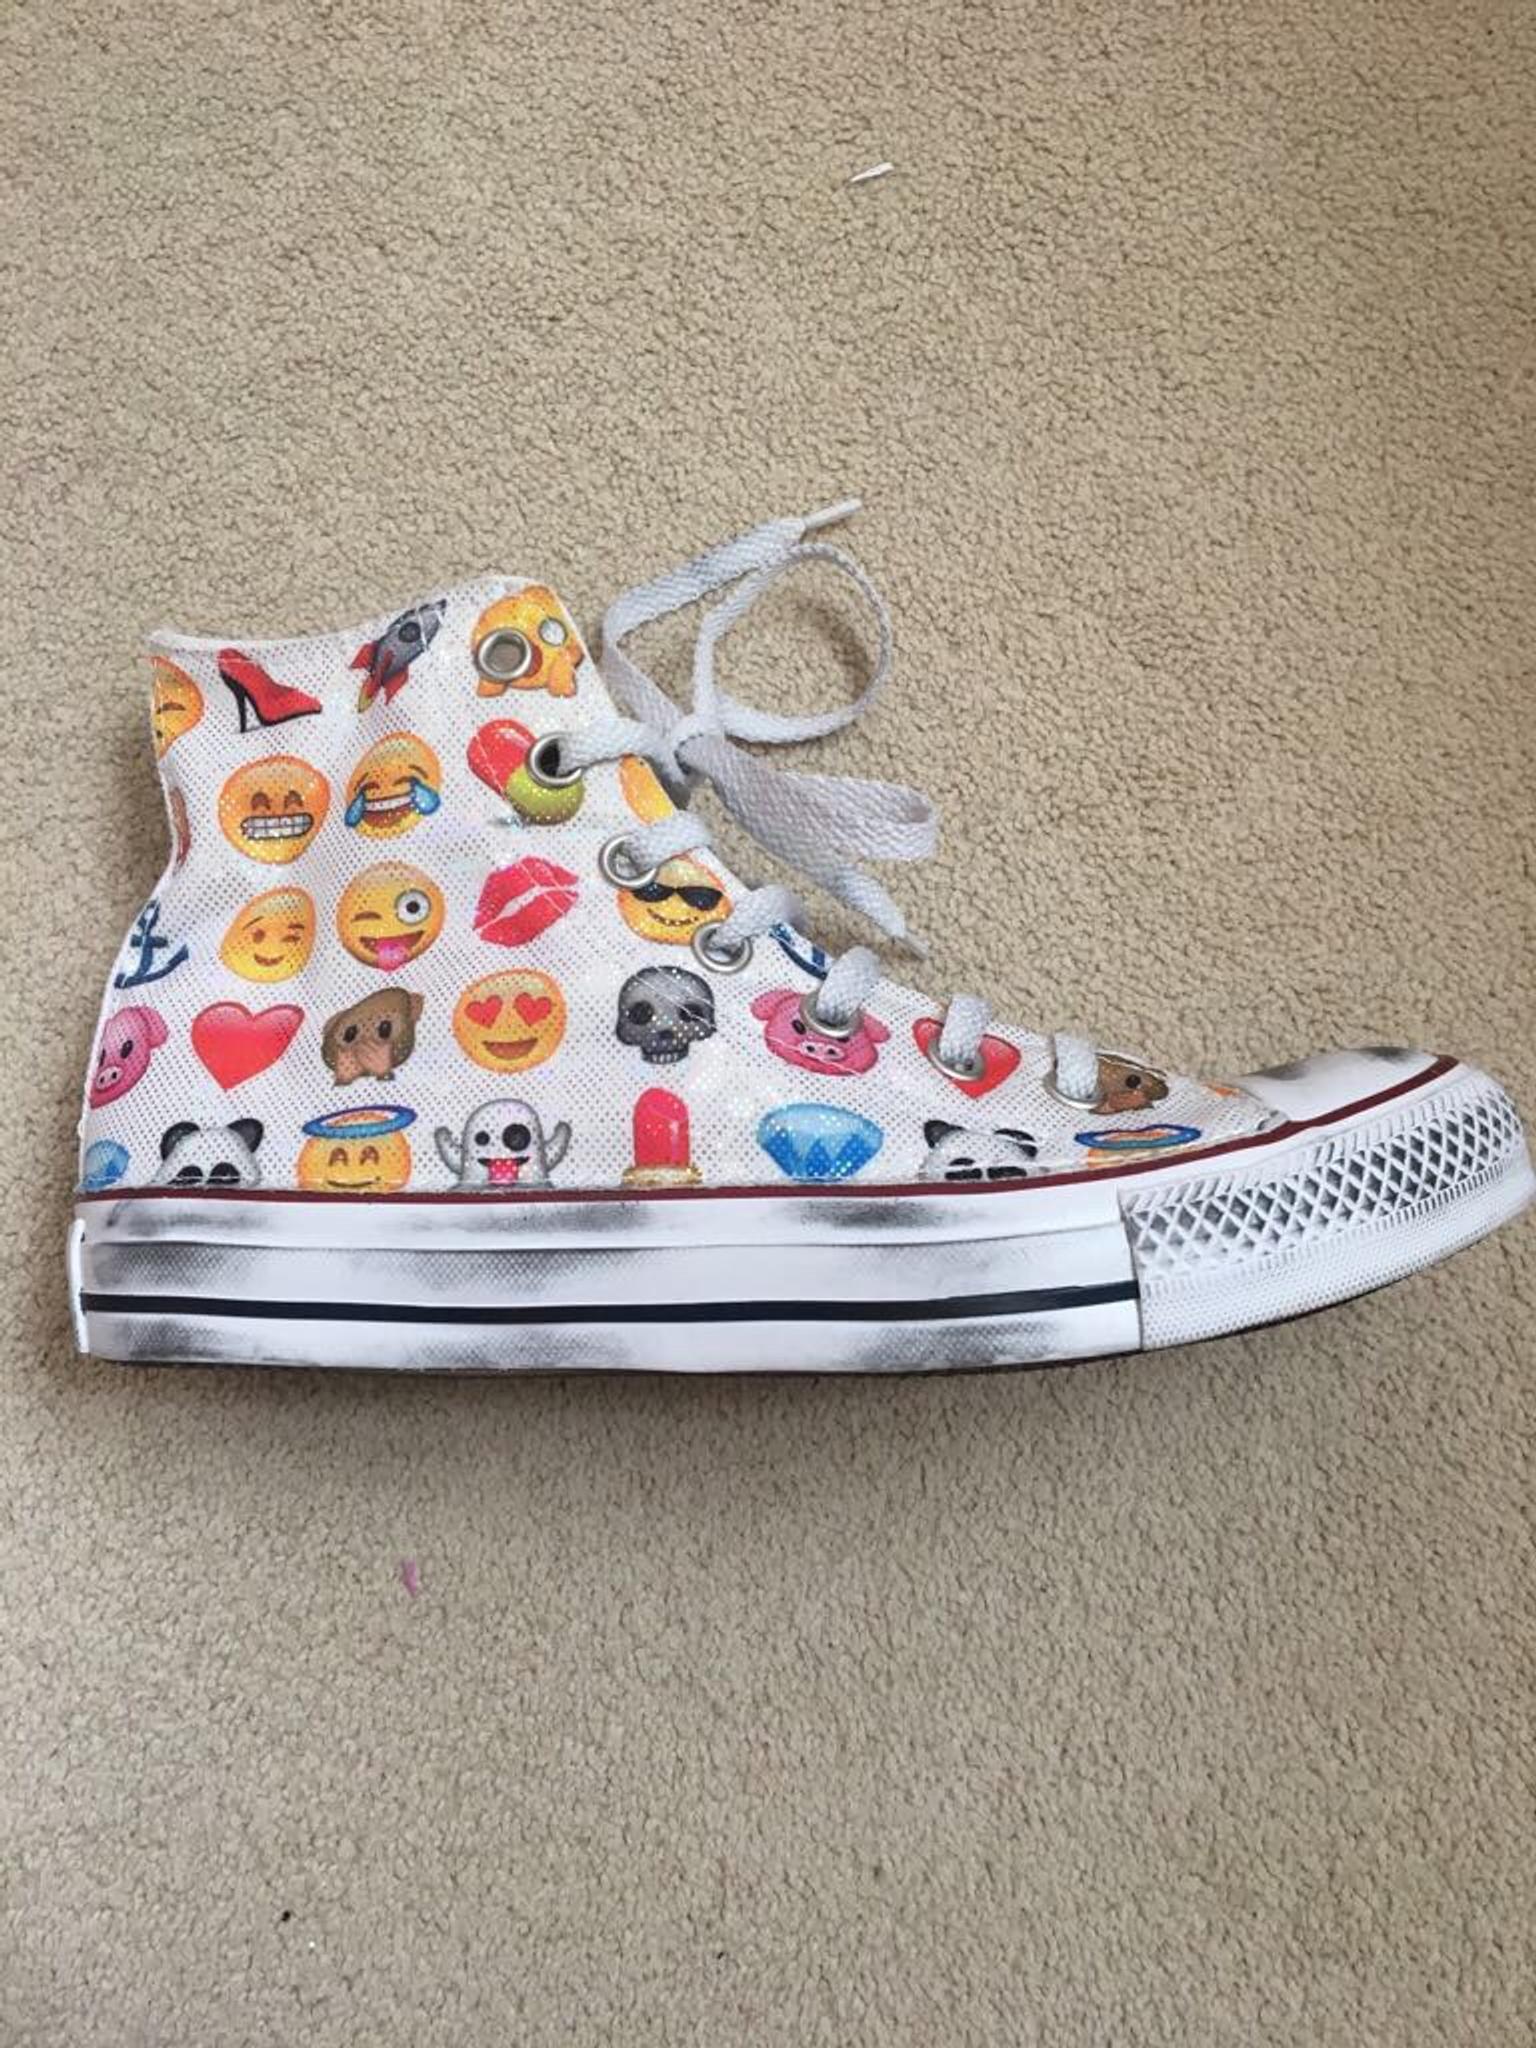 Women Converse Emoji in N21 Enfield for £25.00 for sale | Shpock